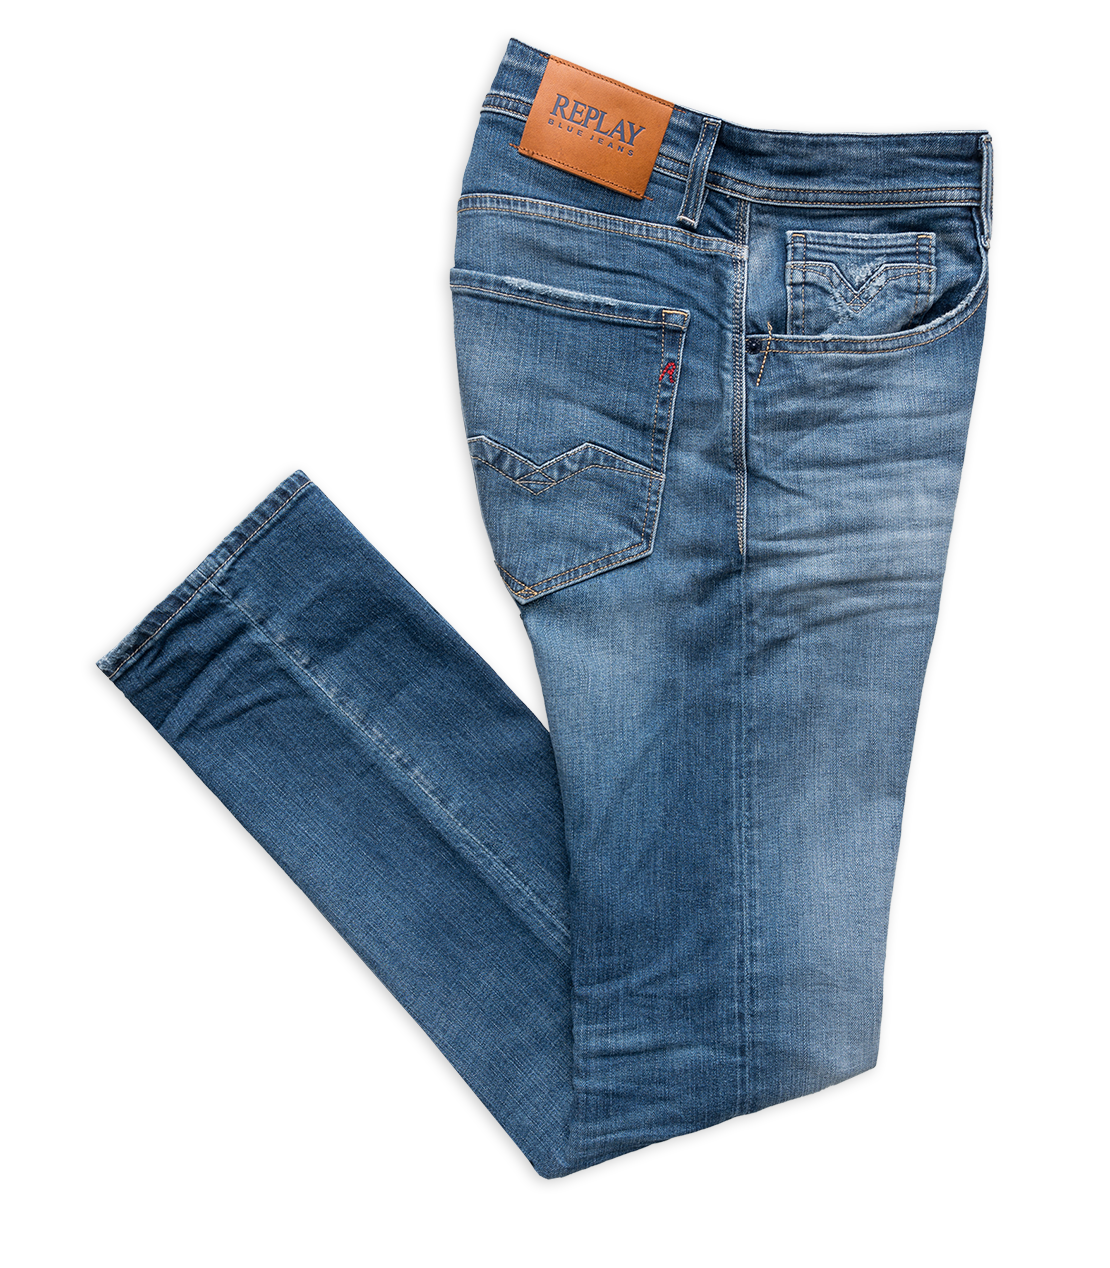 Replay Jeans Authenthic Preloved for Ladies